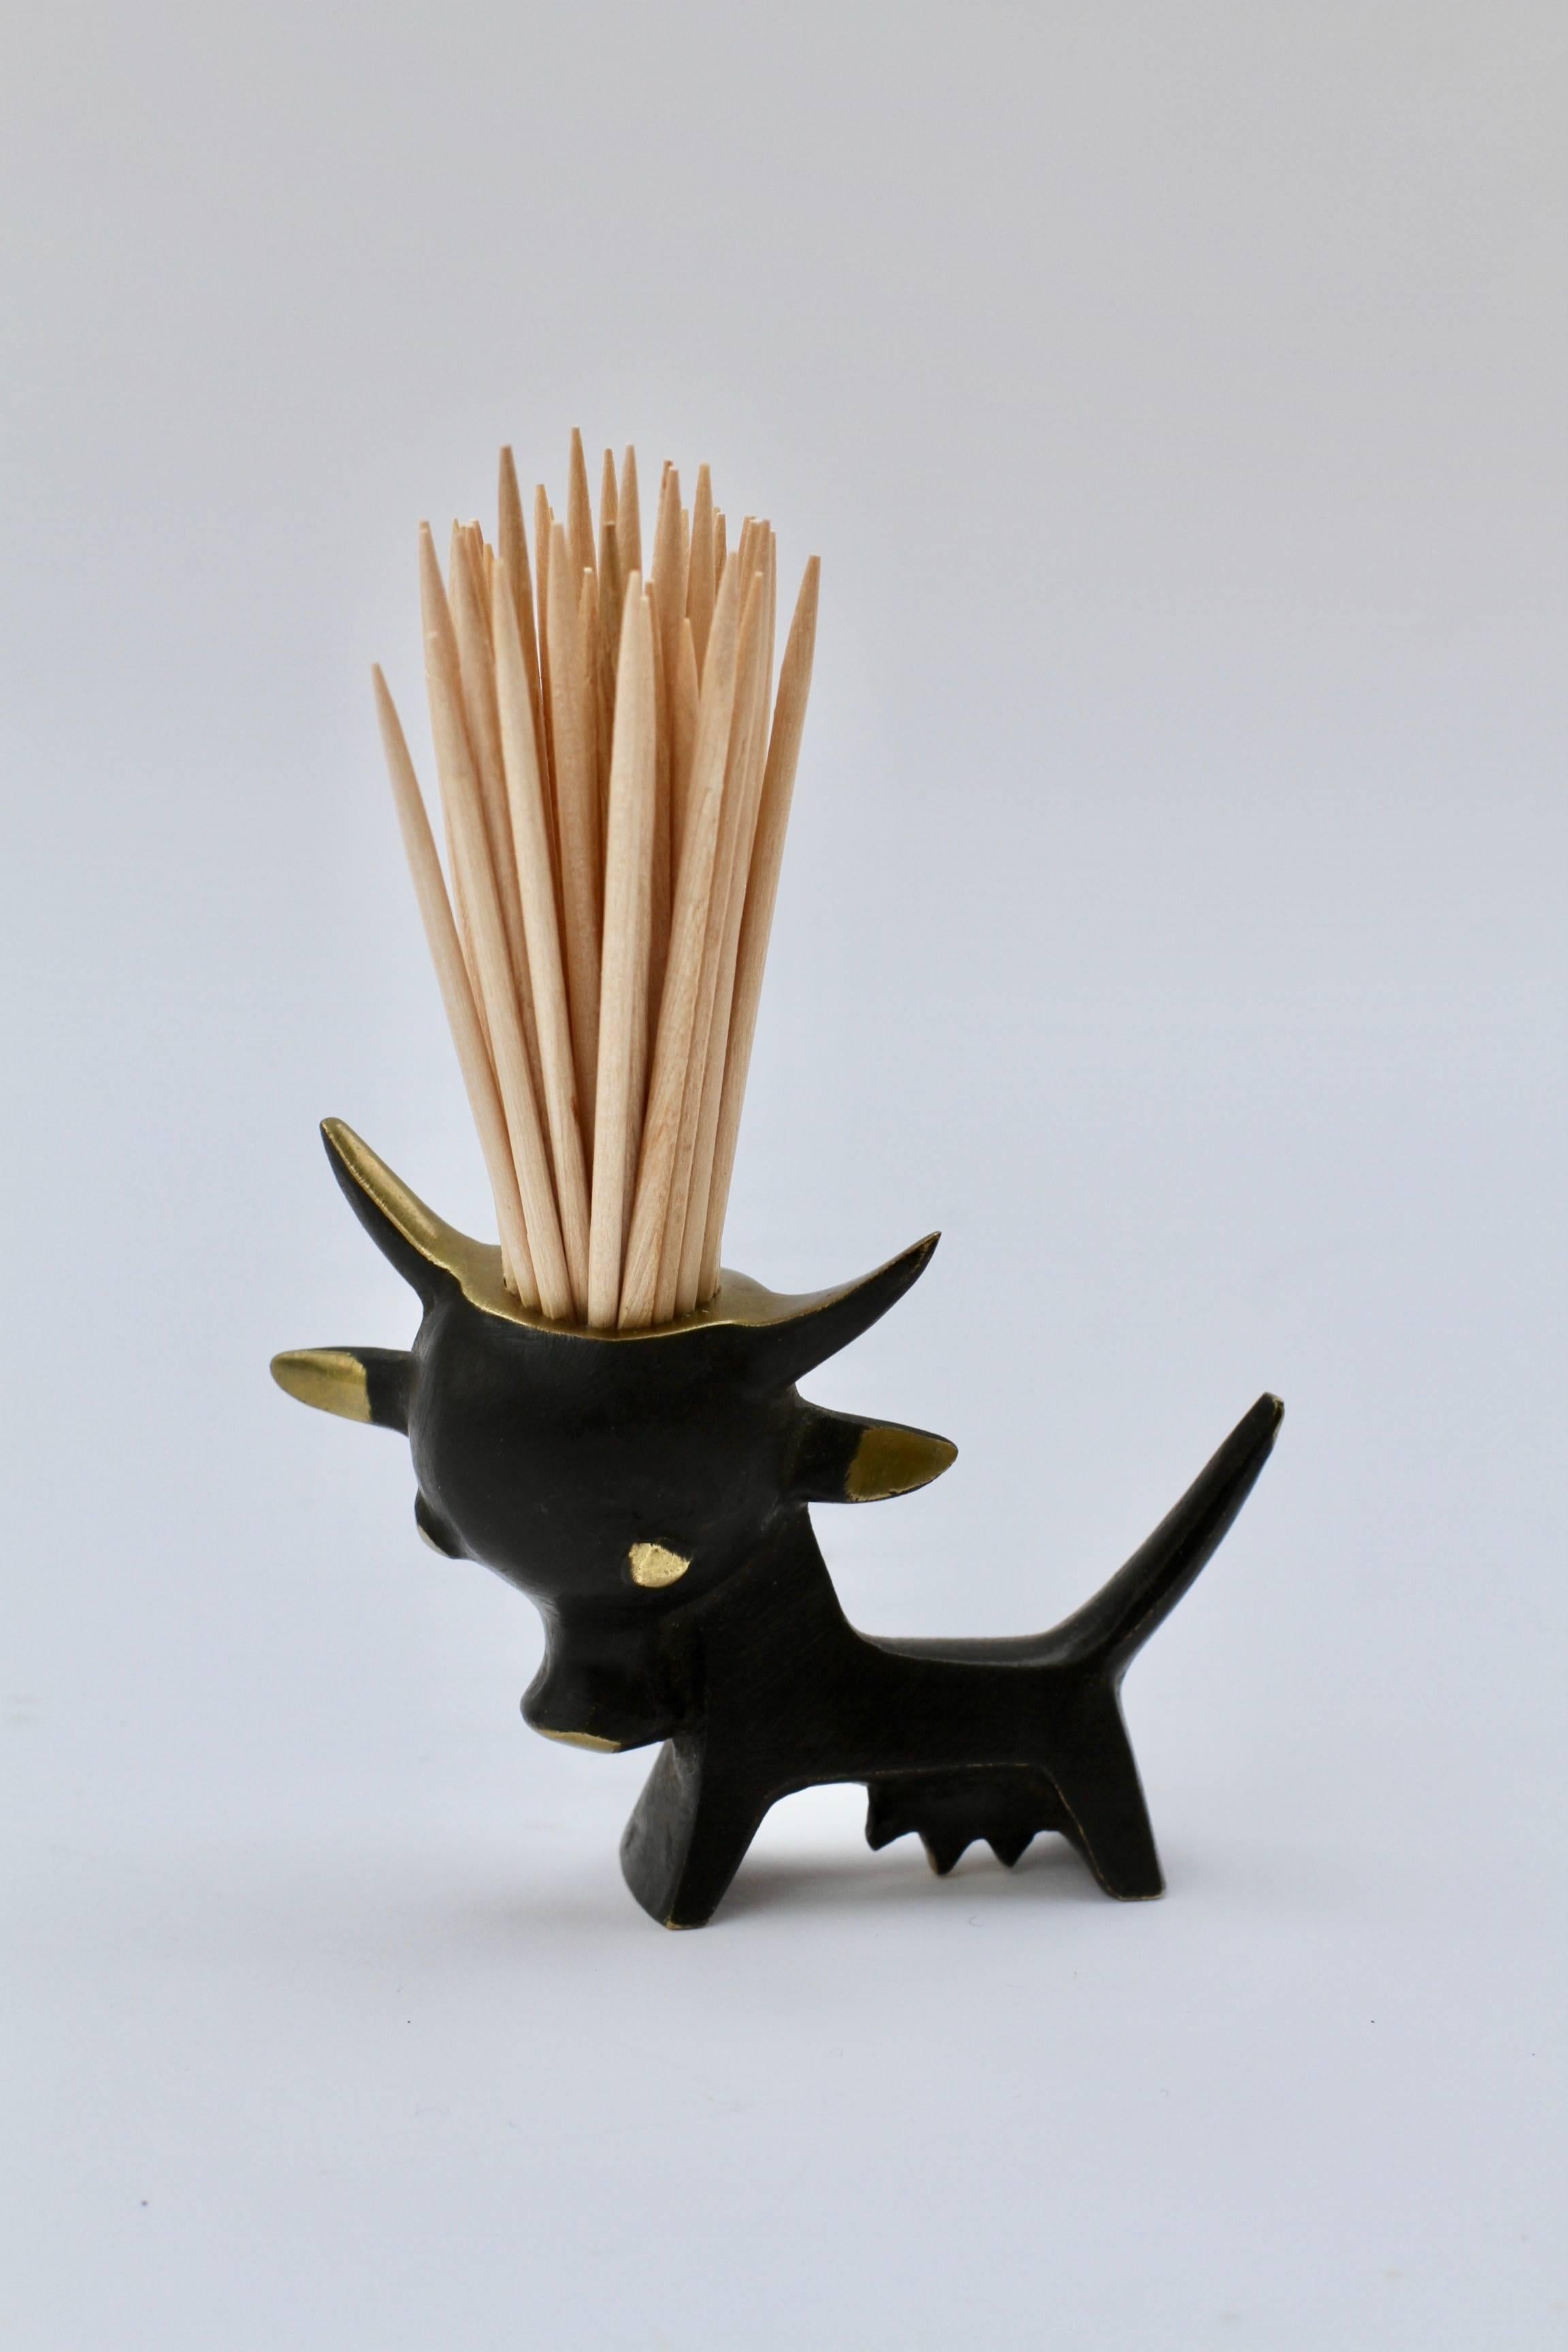 Austrian Whimsical Brass Cow Toothpick Holder by Walter Bosse for Baller, circa 1950s